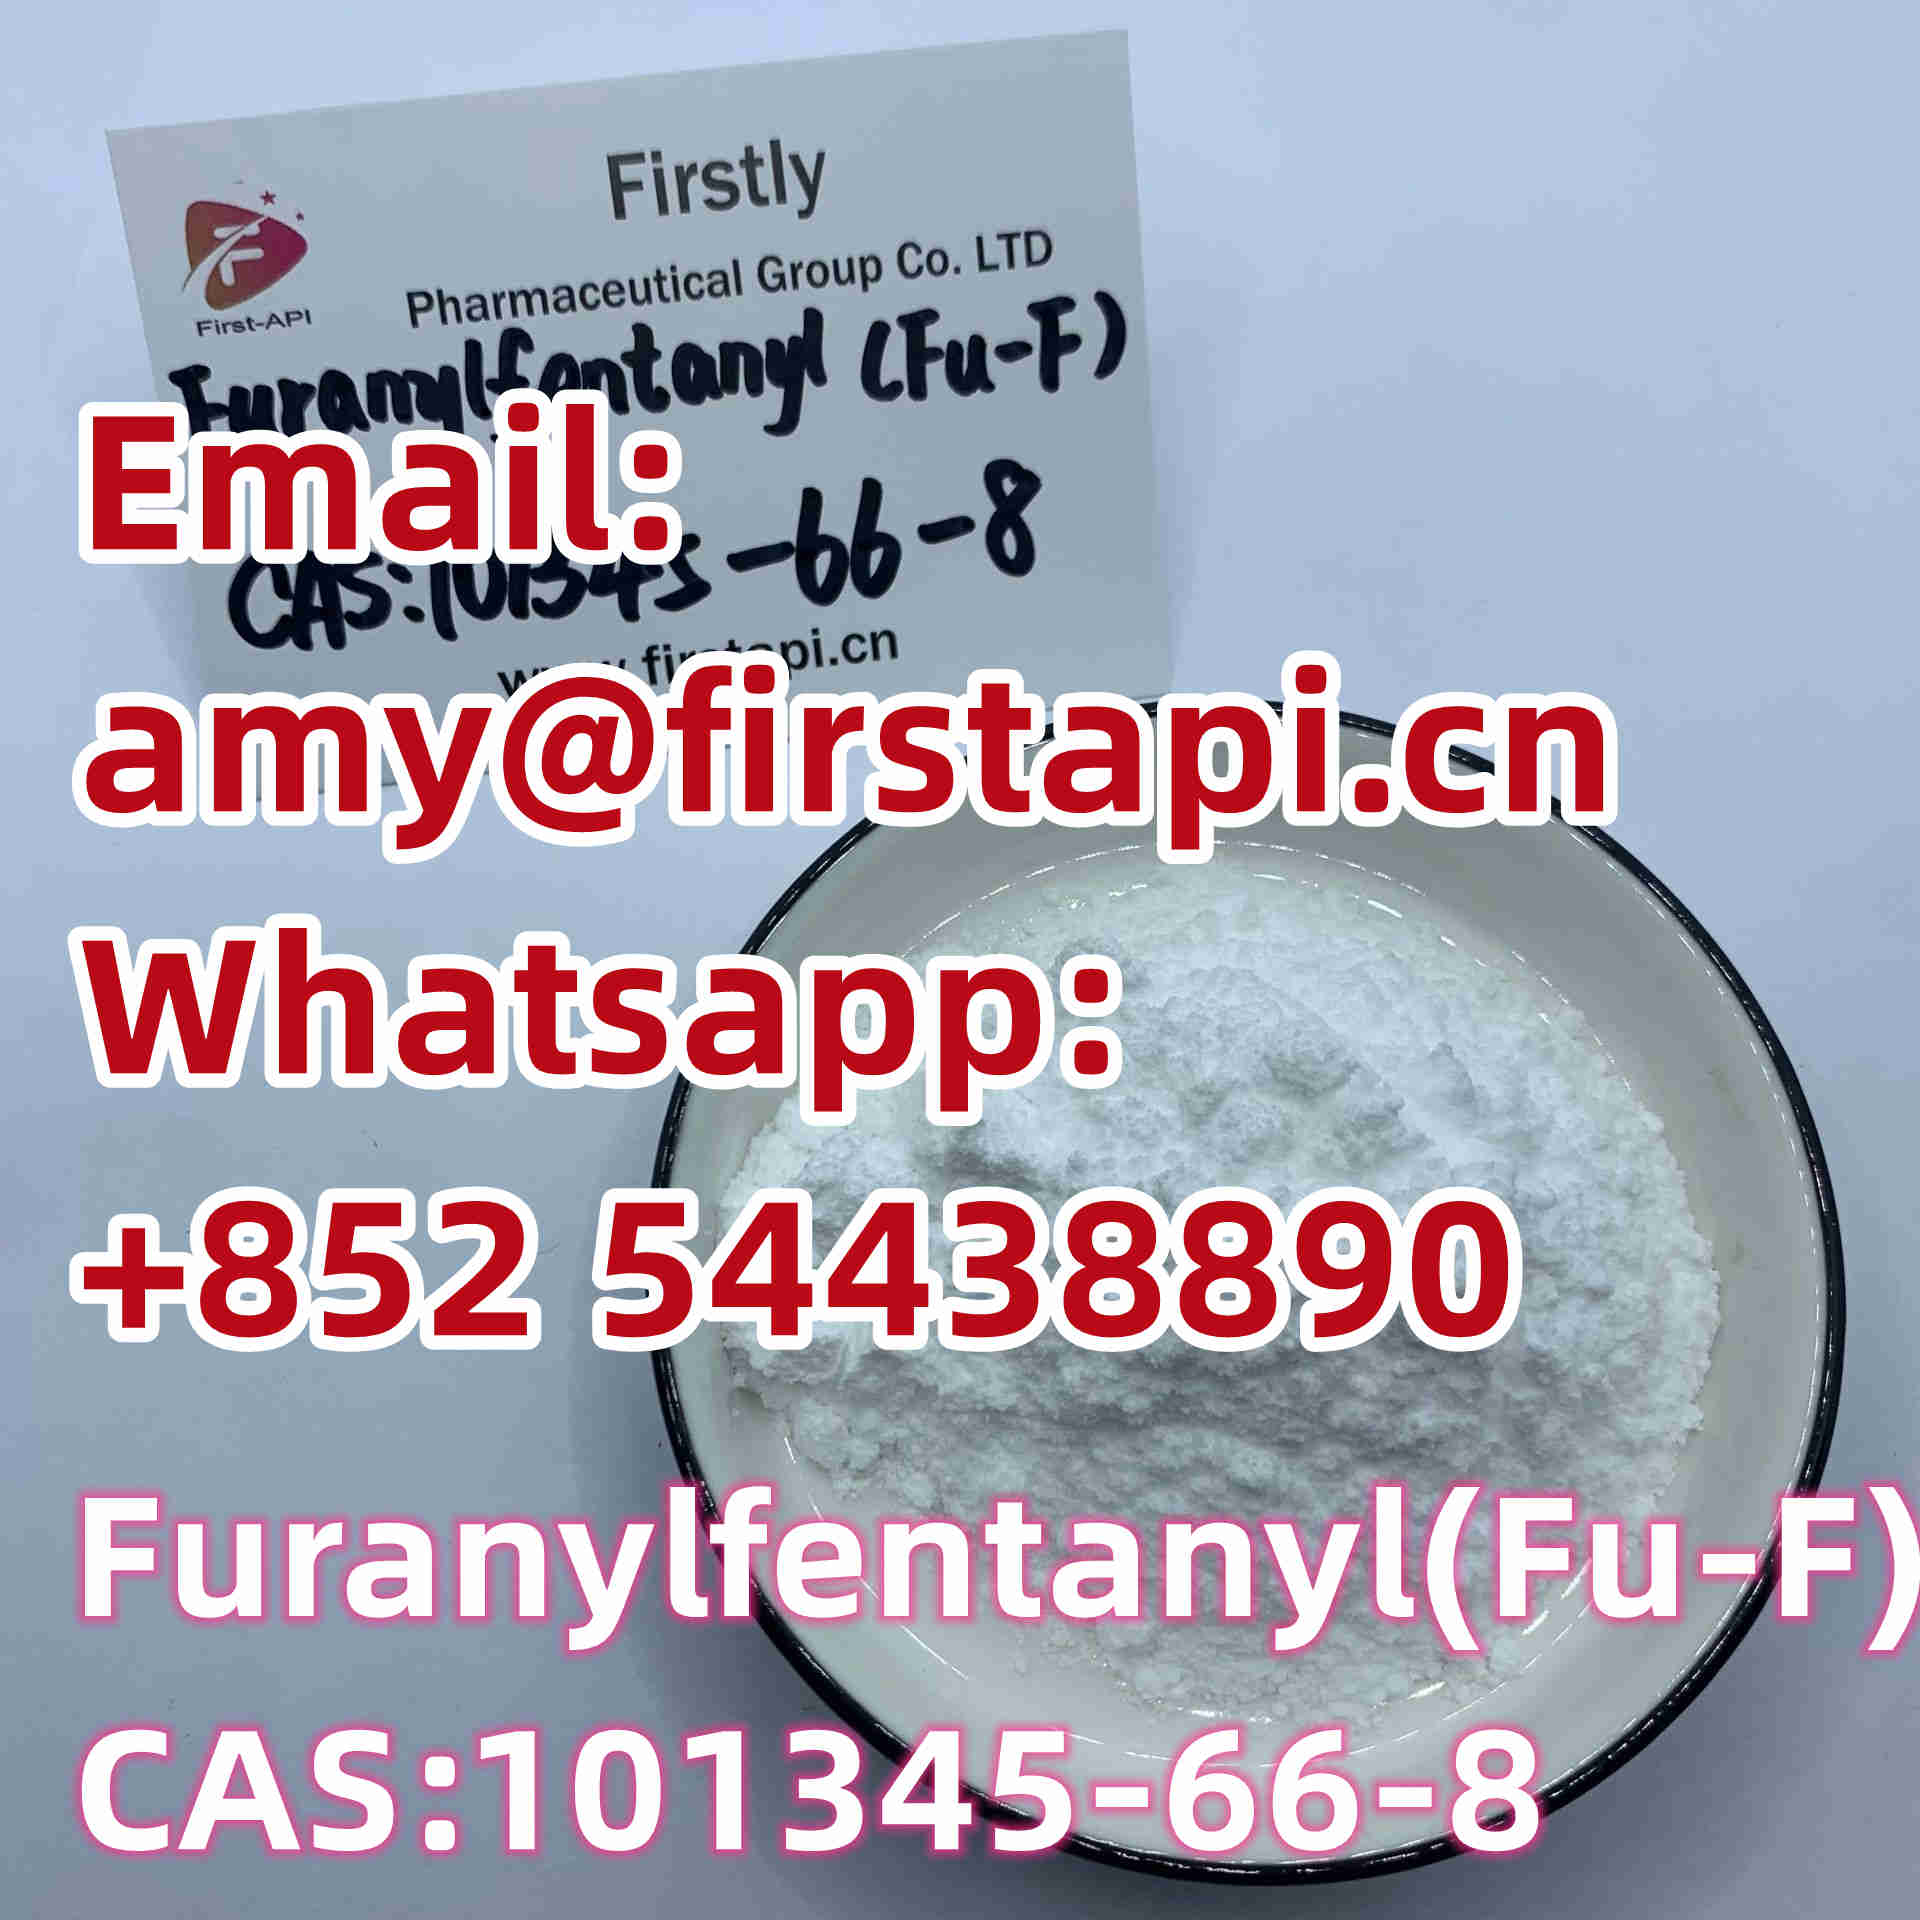 Whatsapp:+852 54438890,Chemical Name:	Furanylfentanyl,CAS No.:	101345-66-8,salable - photo